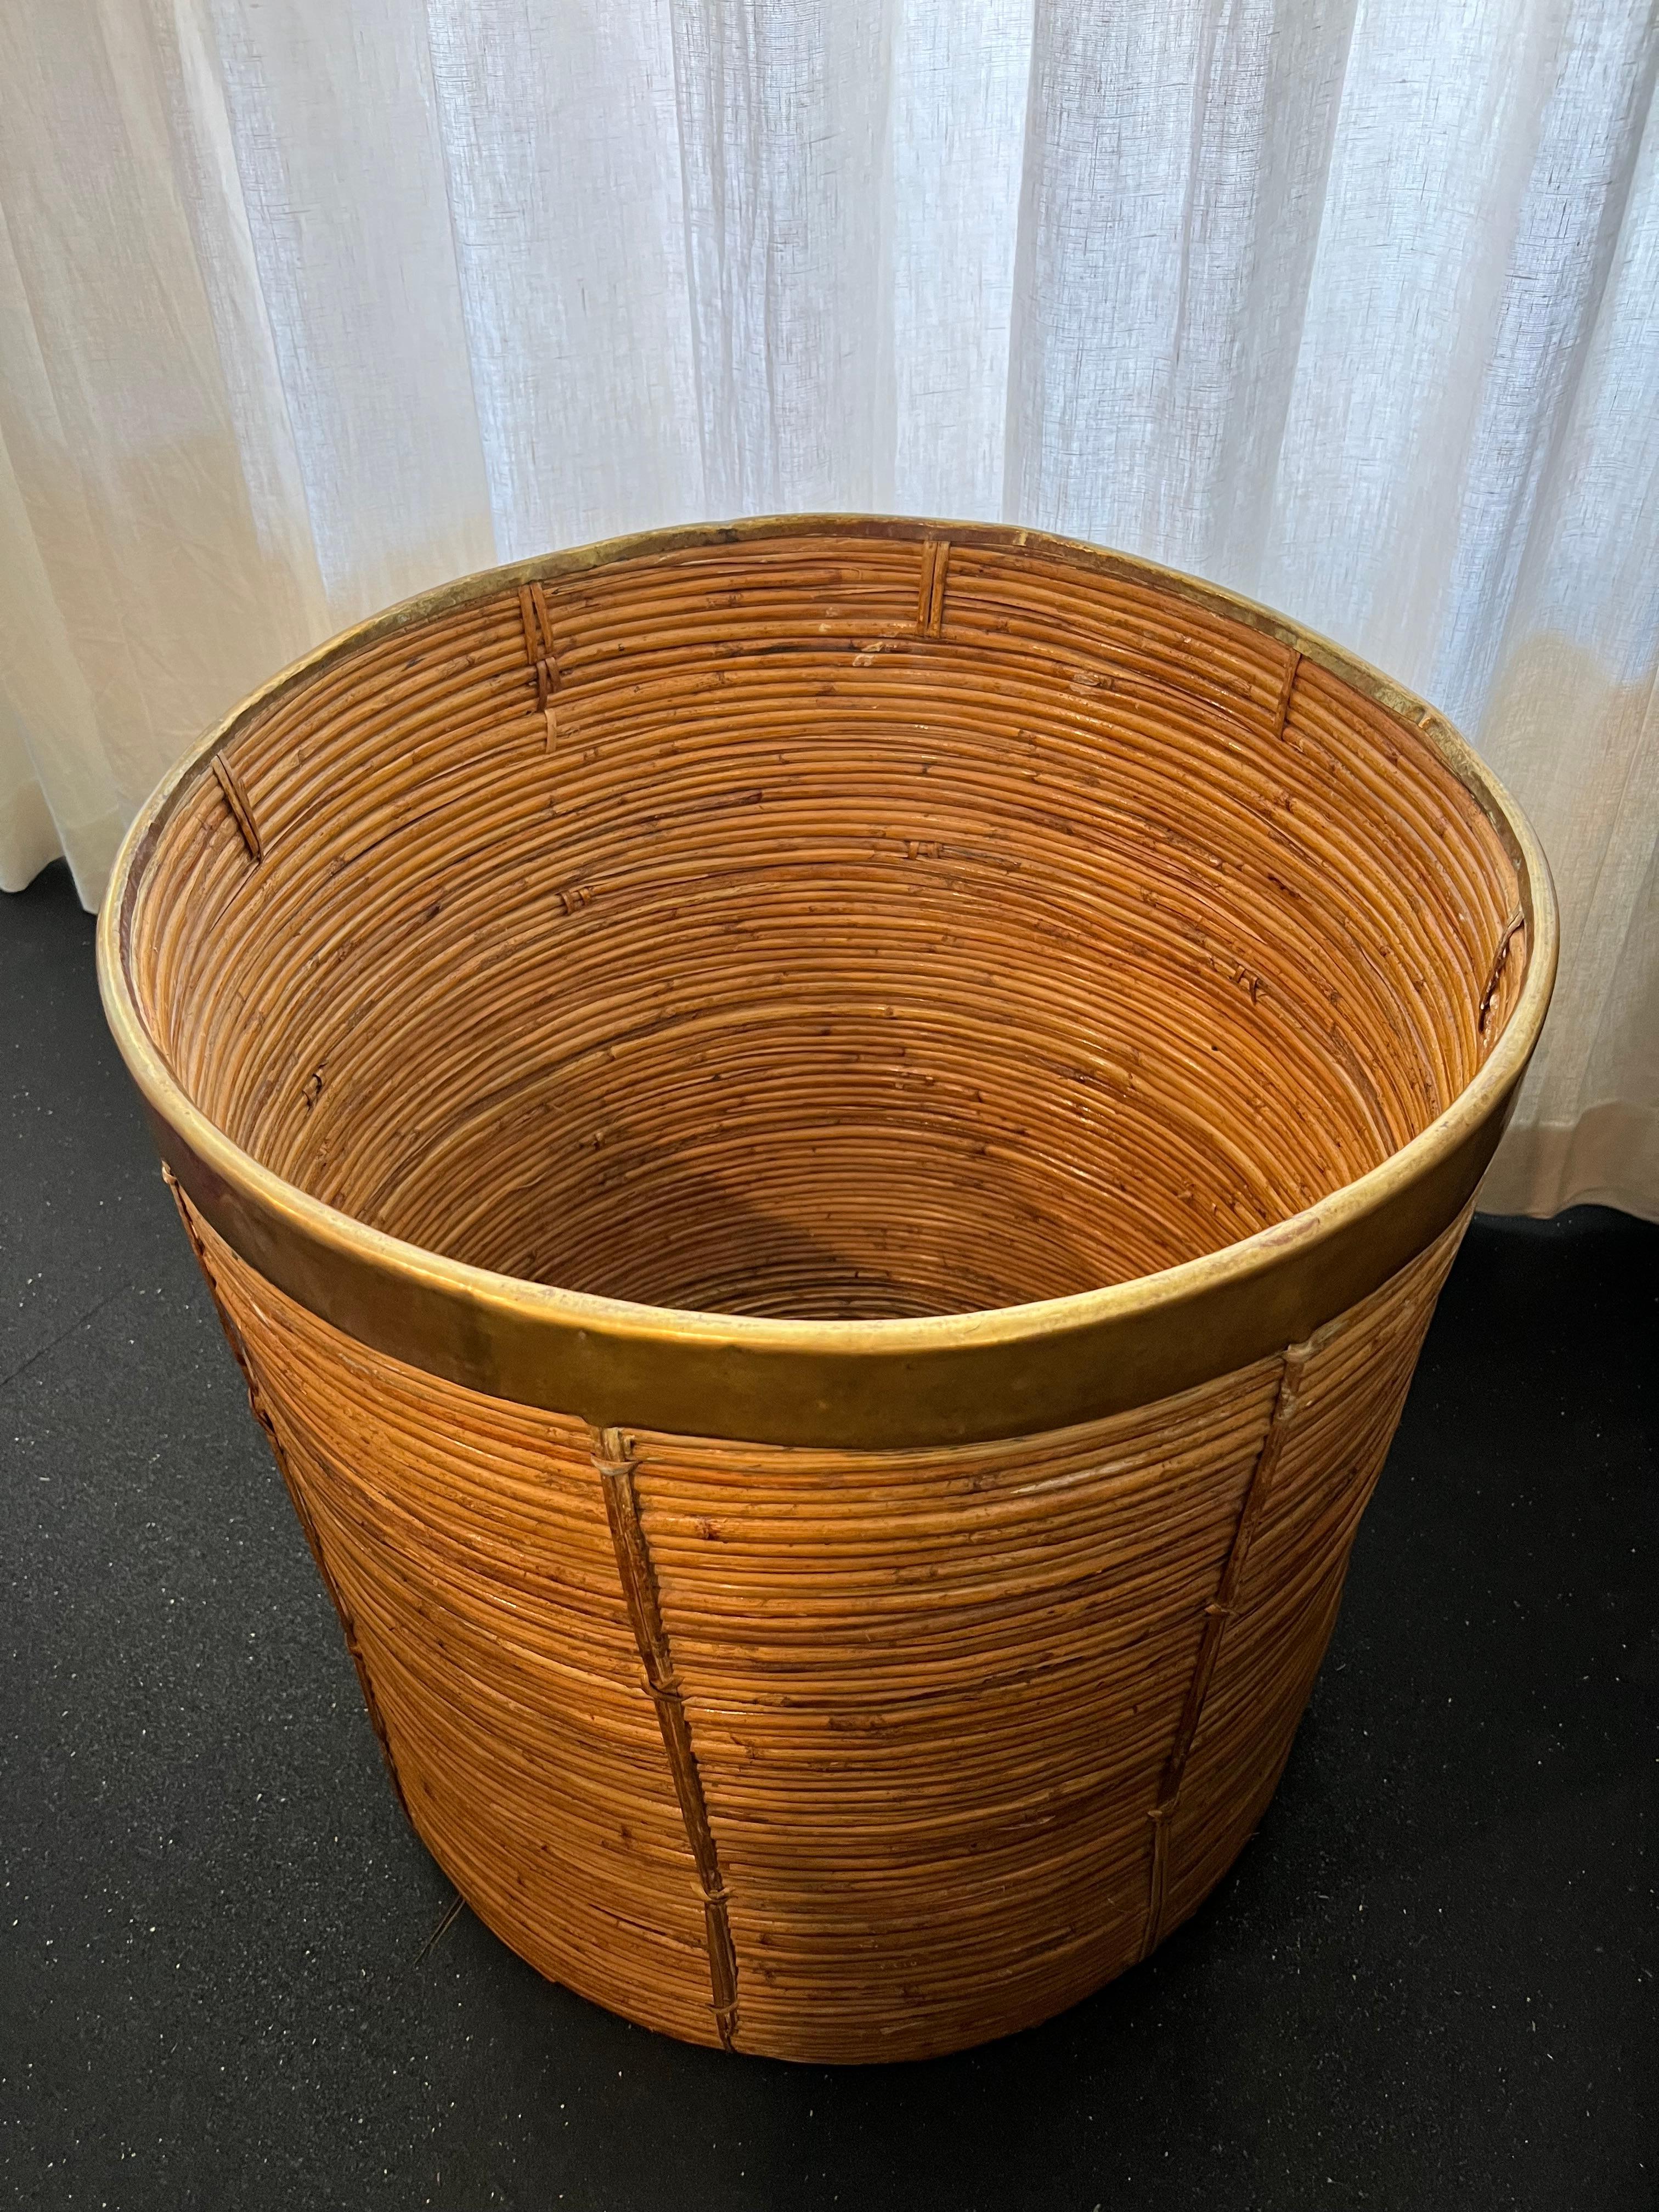 Unknown Monumental Gabriella Crespi Style Pencil Reed Basket For Sale